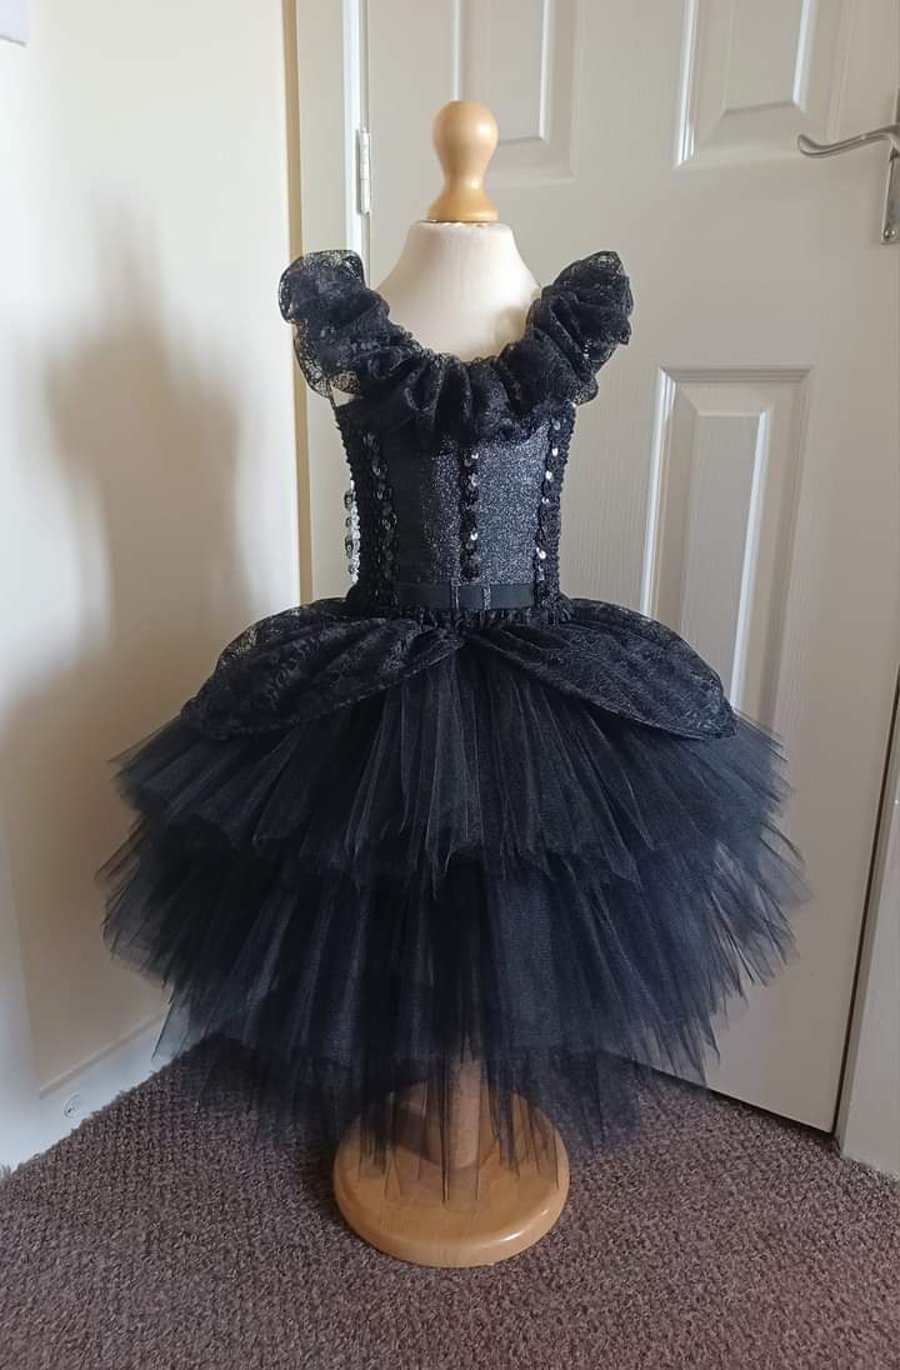  Girl's Gothic Full Length Tutu Dress - Ages From 1-2 Years to 6-7 Years UK 